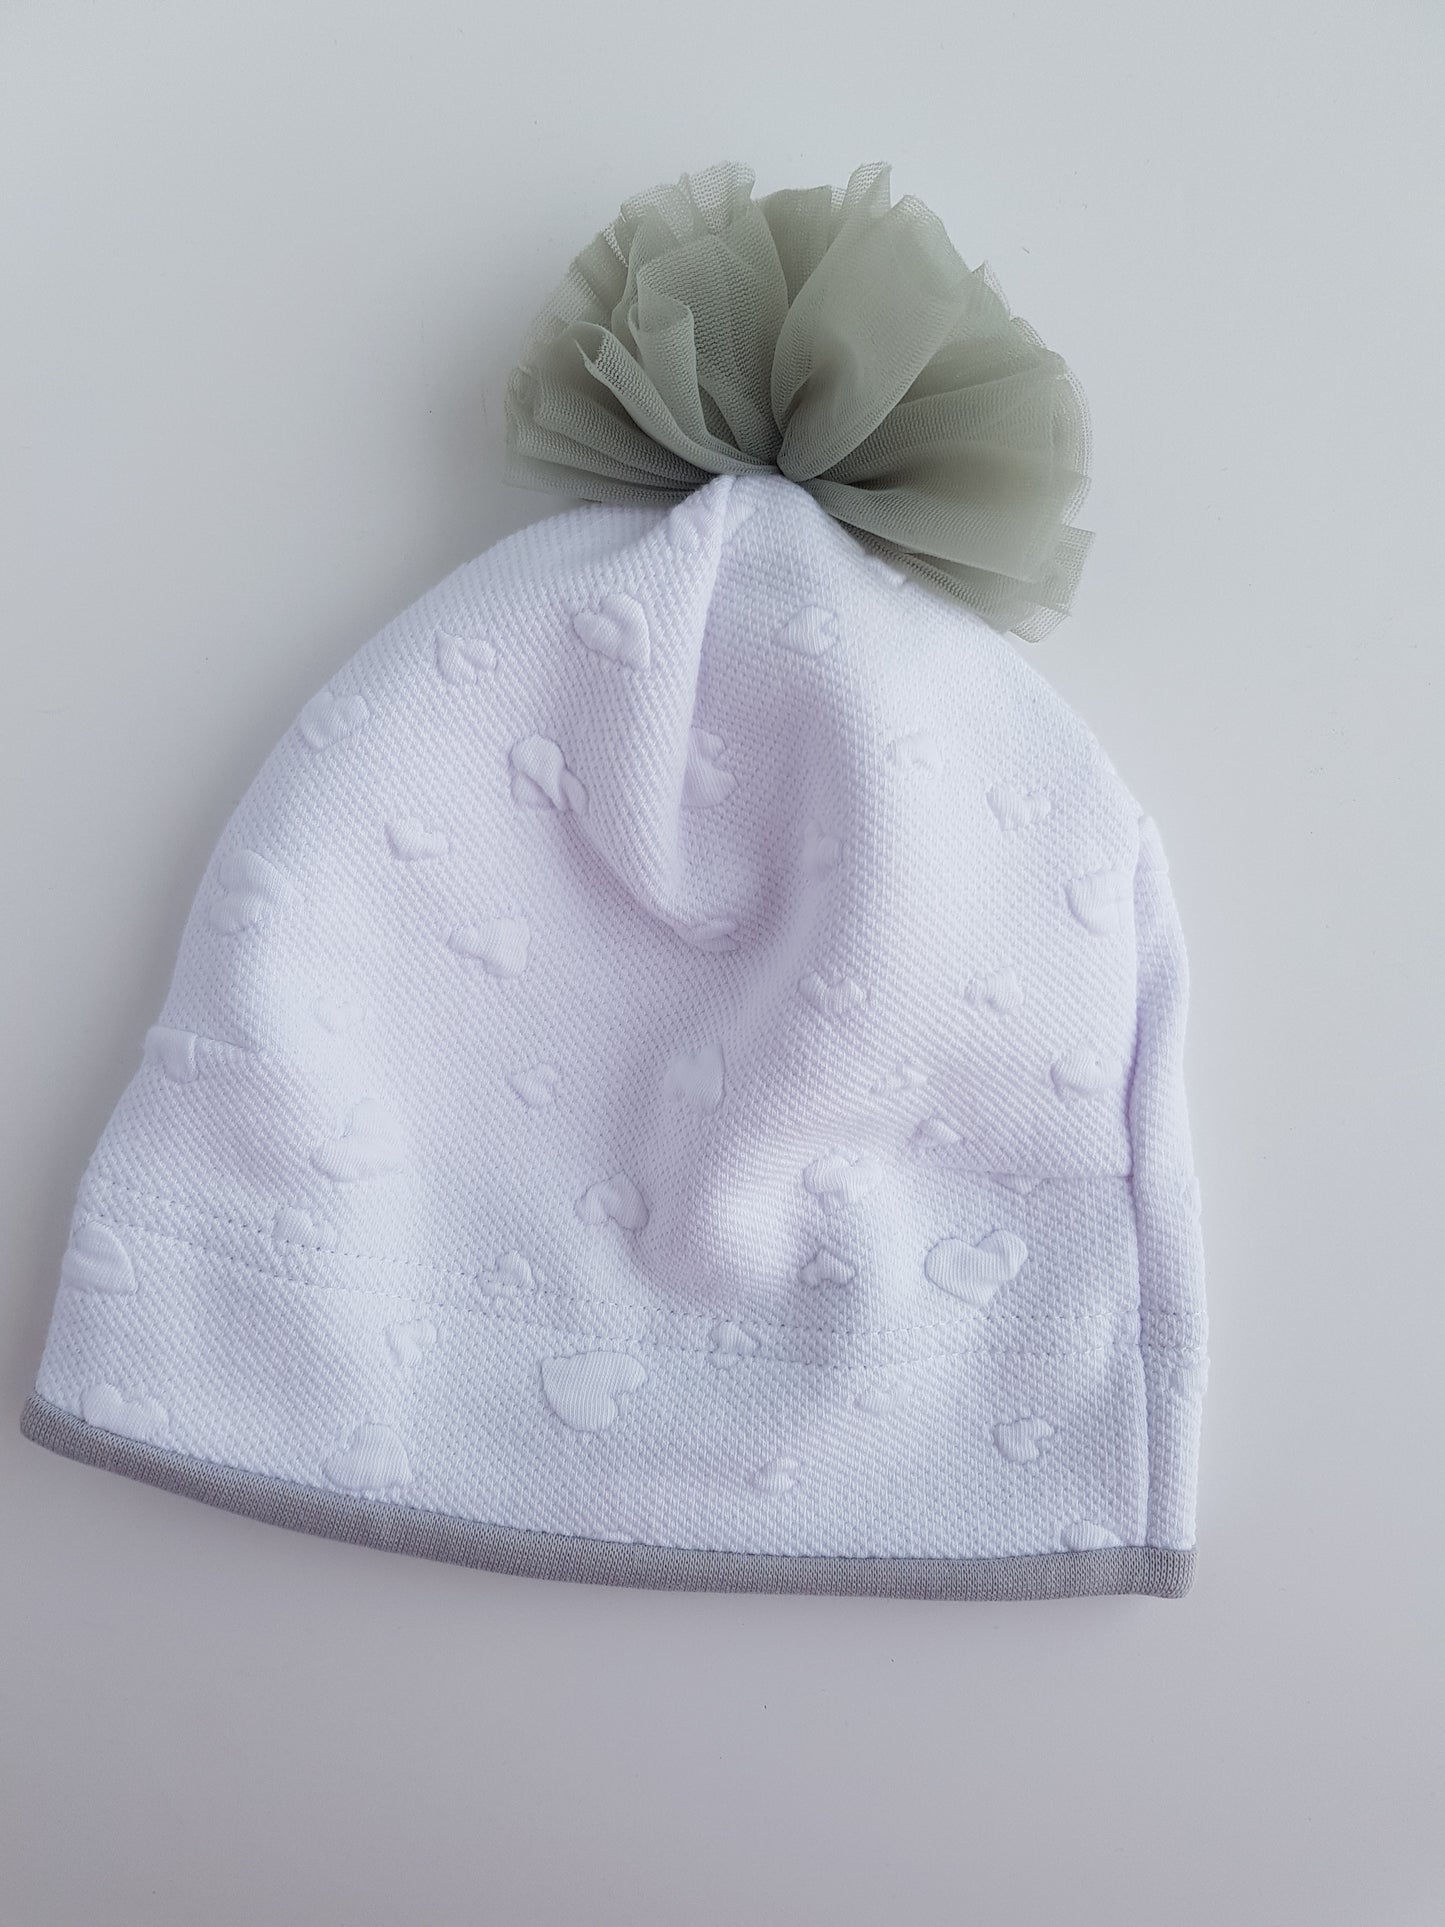 Hat with the pom-pom for girls 1- 5 years